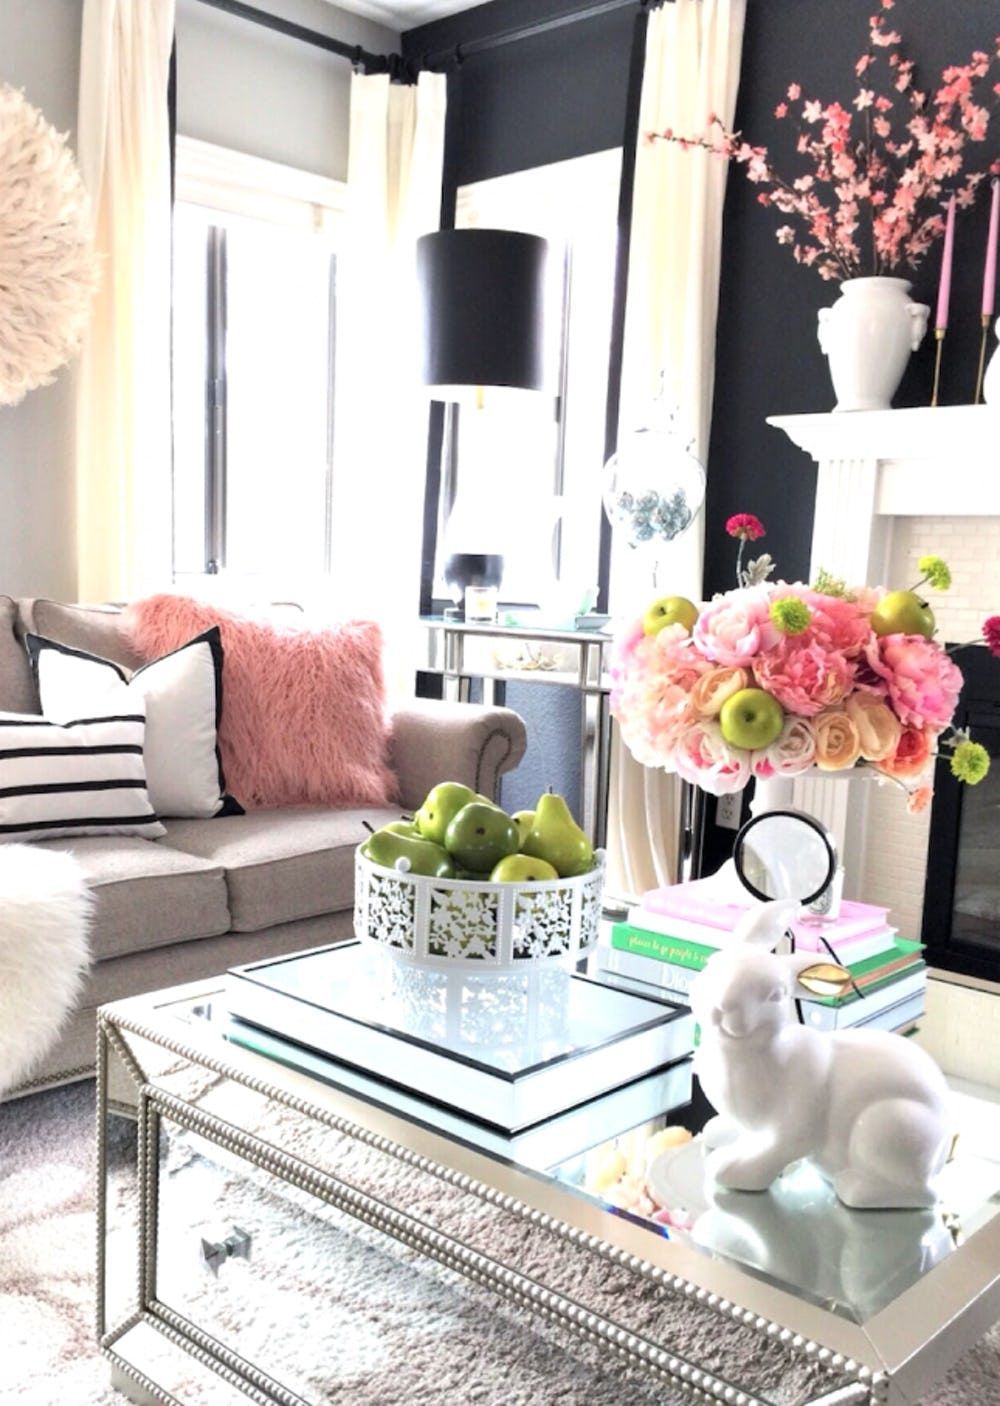 13 Kate Spade New York-Inspired Decor Ideas for Your Living Room -   11 home accessories Living Room apartments ideas